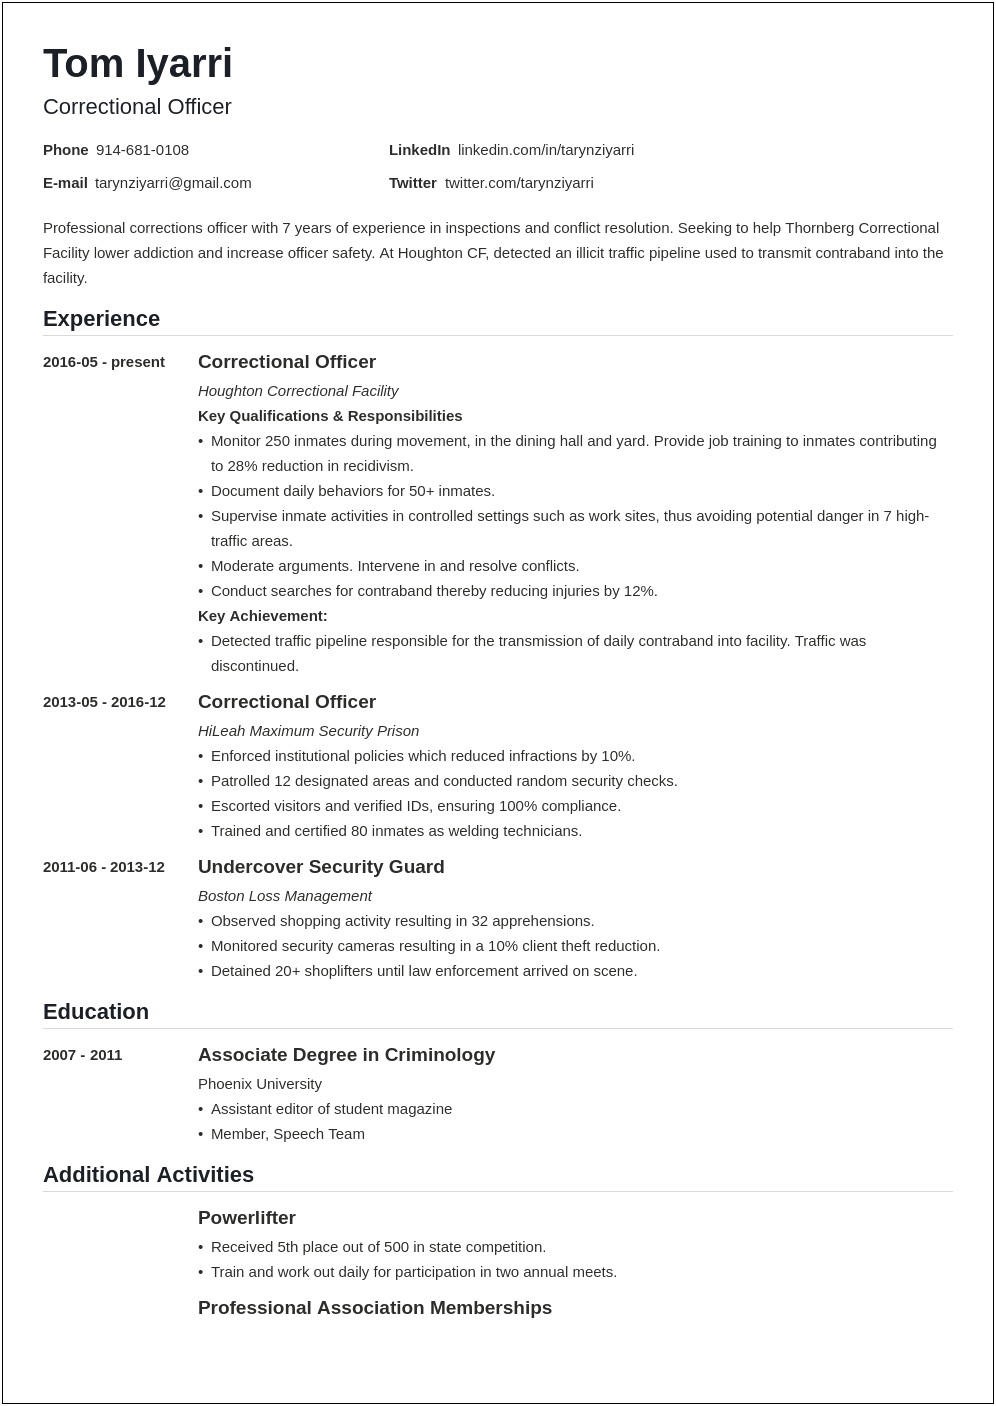 Good Objective Resume Samples For Corrections